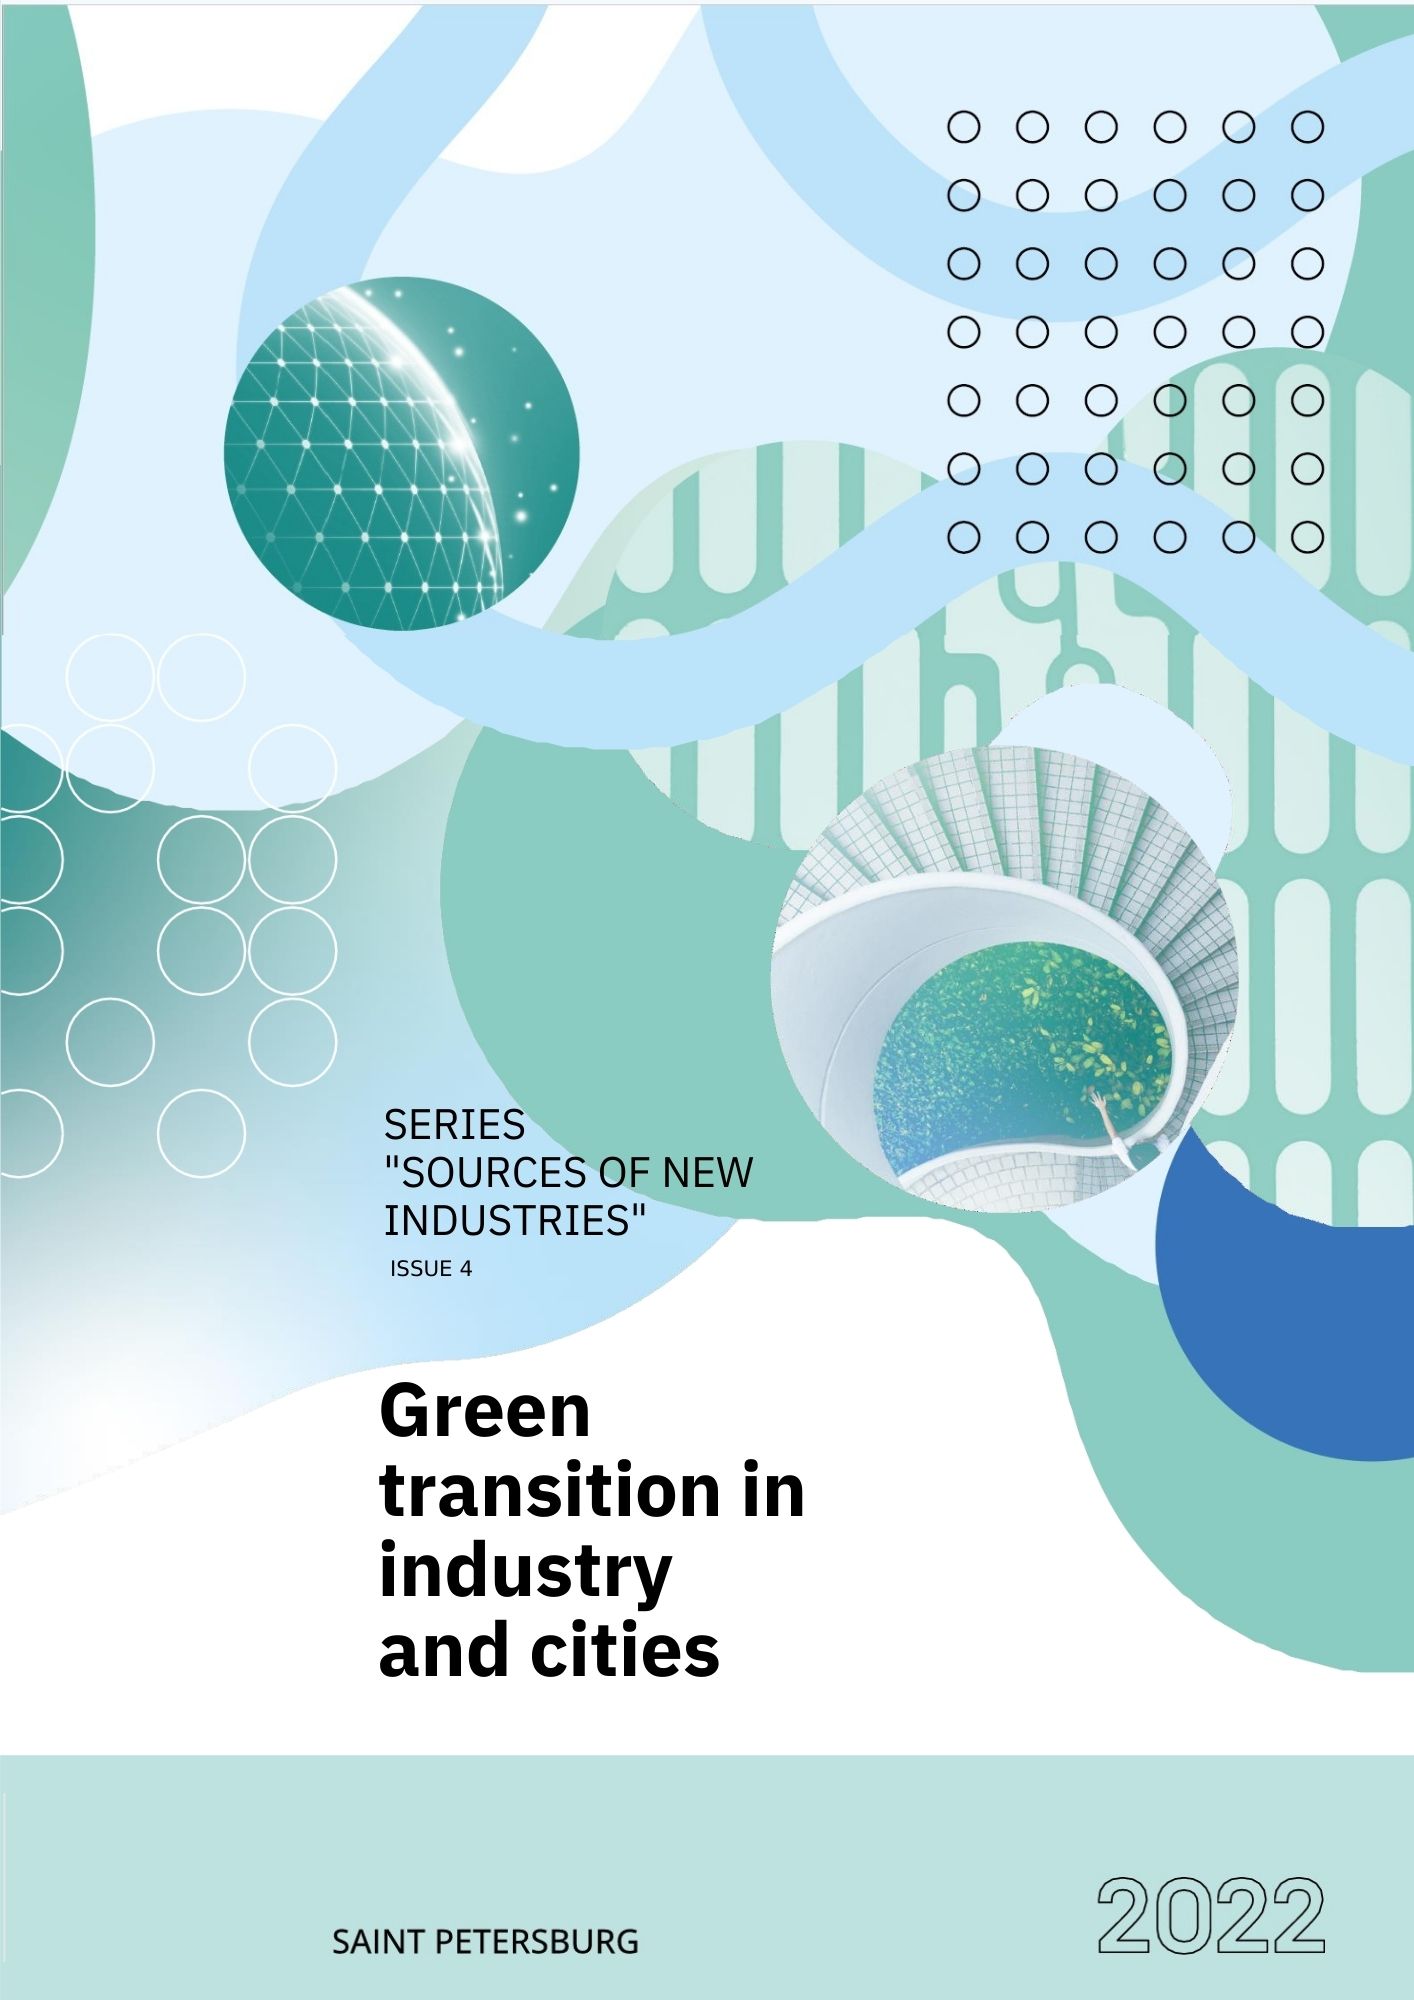 GREEN TRANSITION IN INDUSTRY AND CITIES